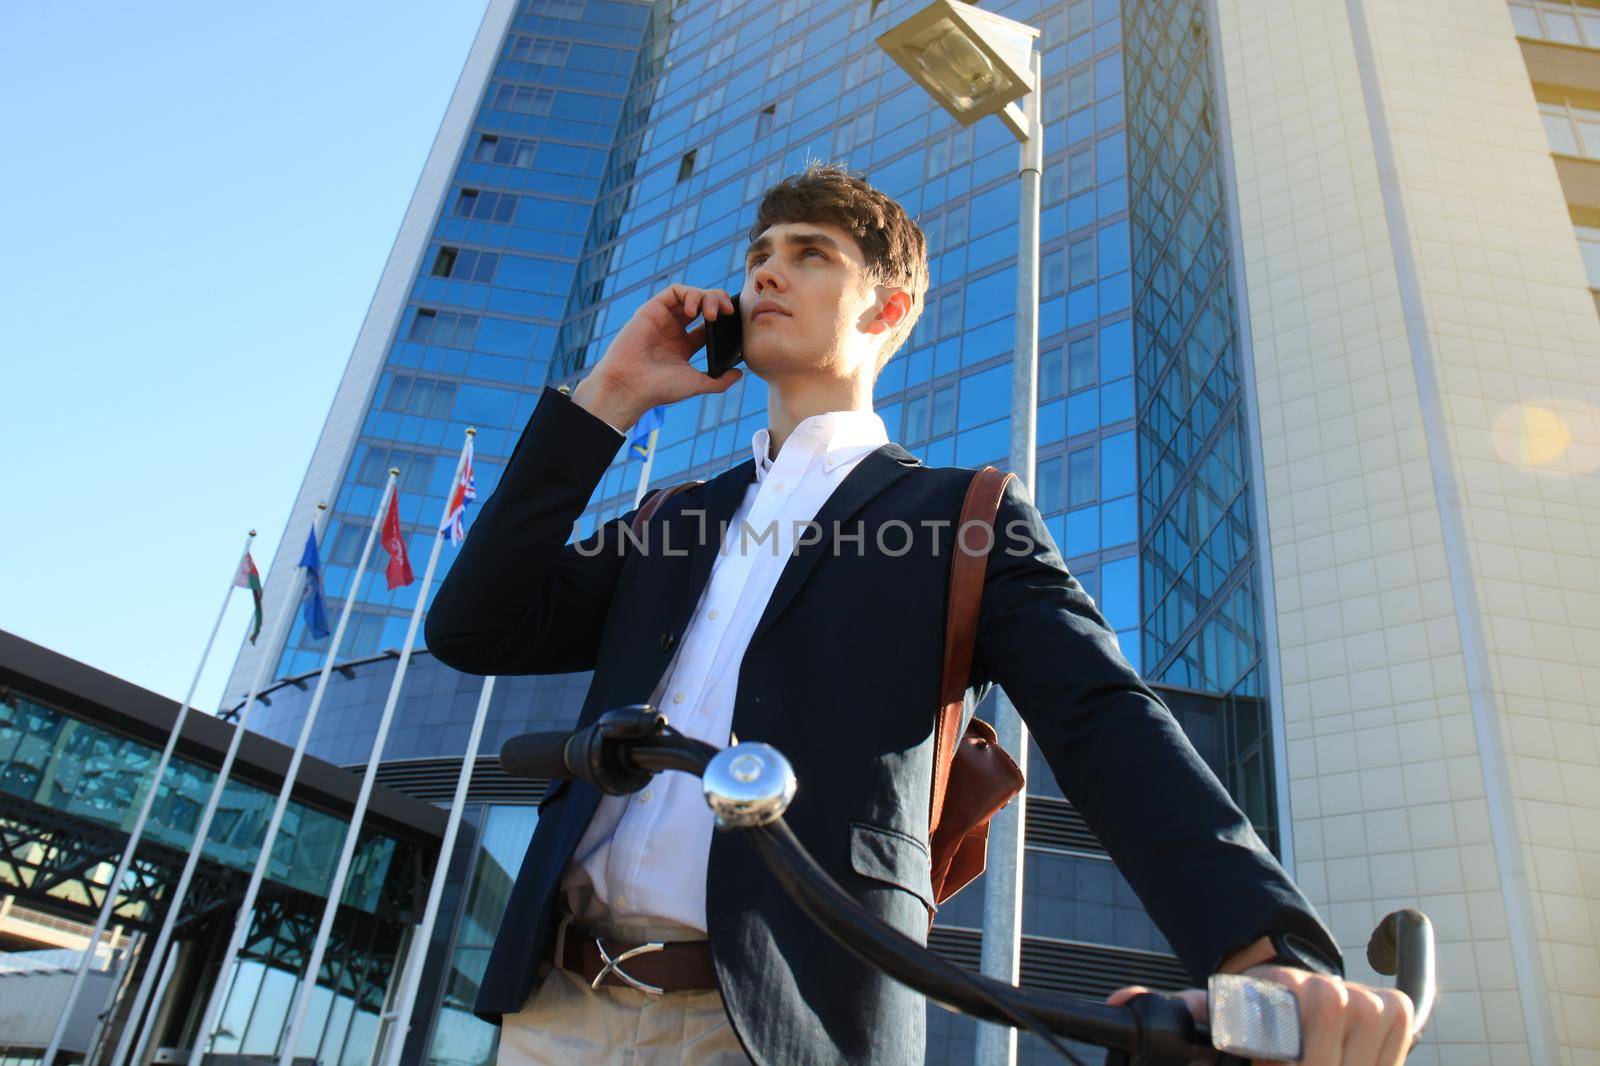 Young businessman with bicycle and smartphone on city street.